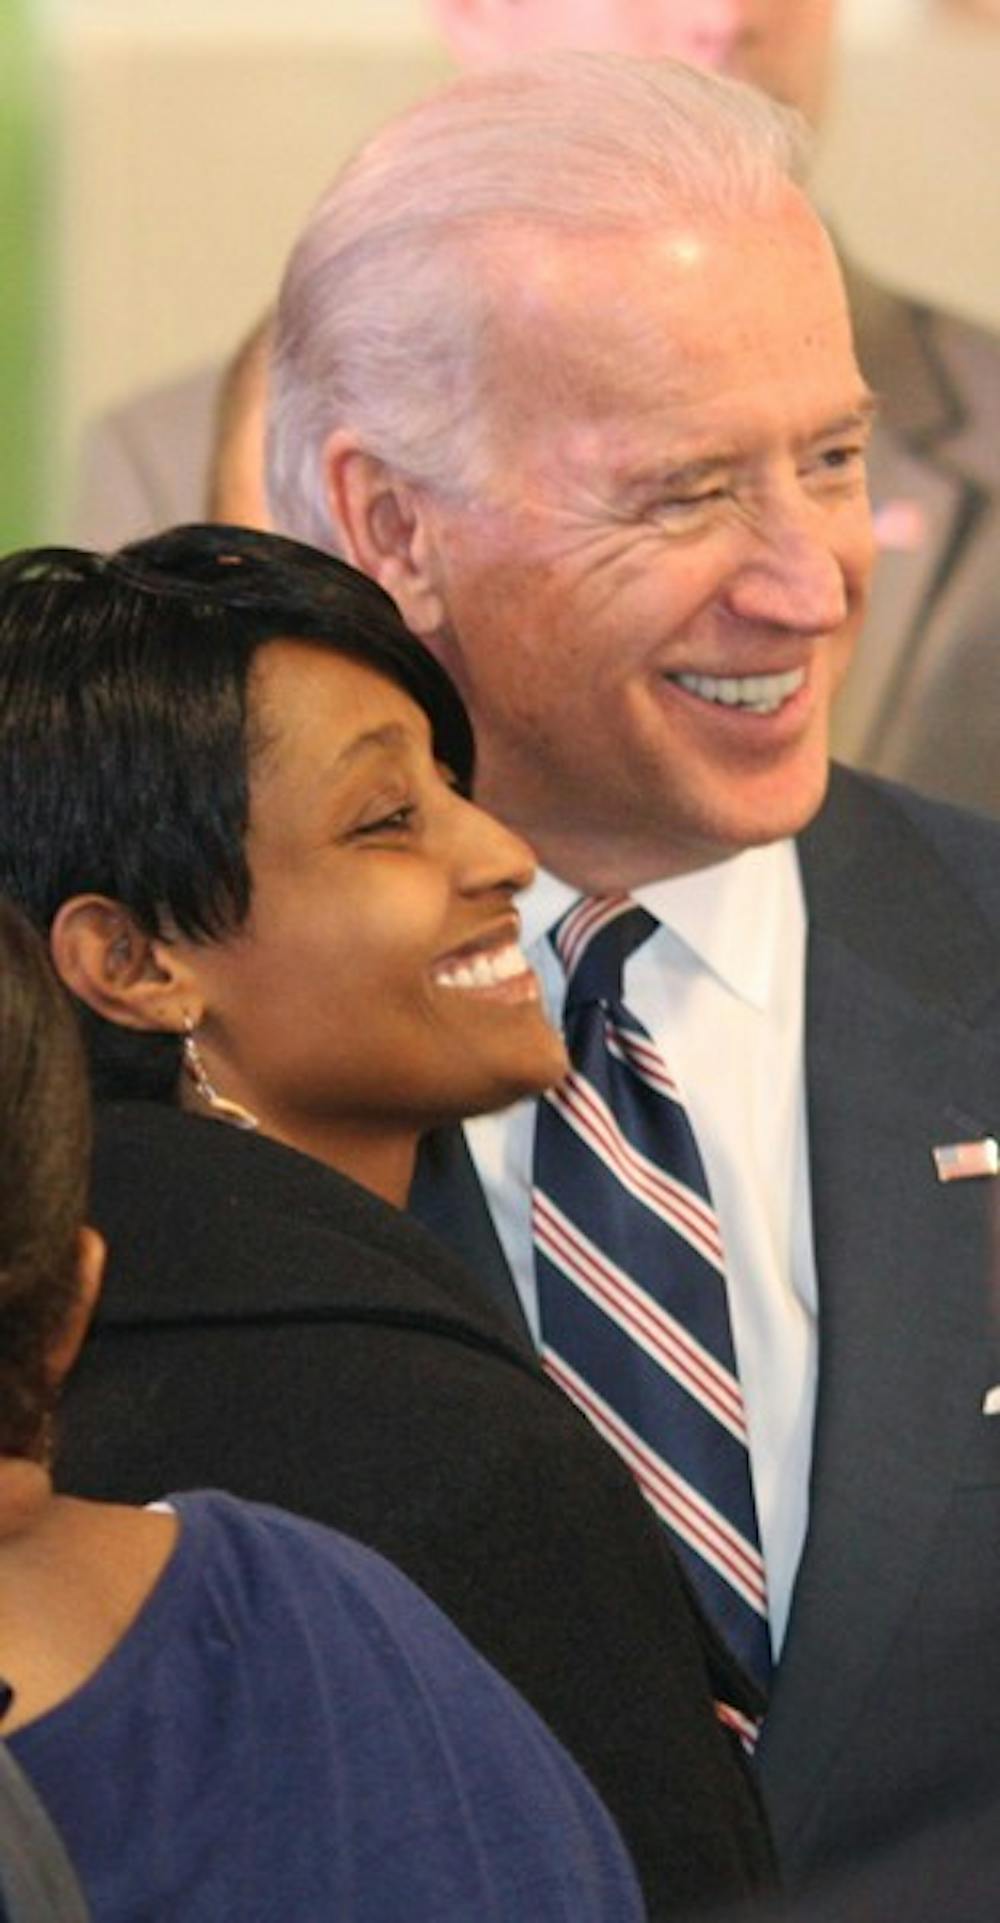 Vice President Joe Biden visited Durham on Thursday to speak about stimulus funds to boost jobs for the middle class.